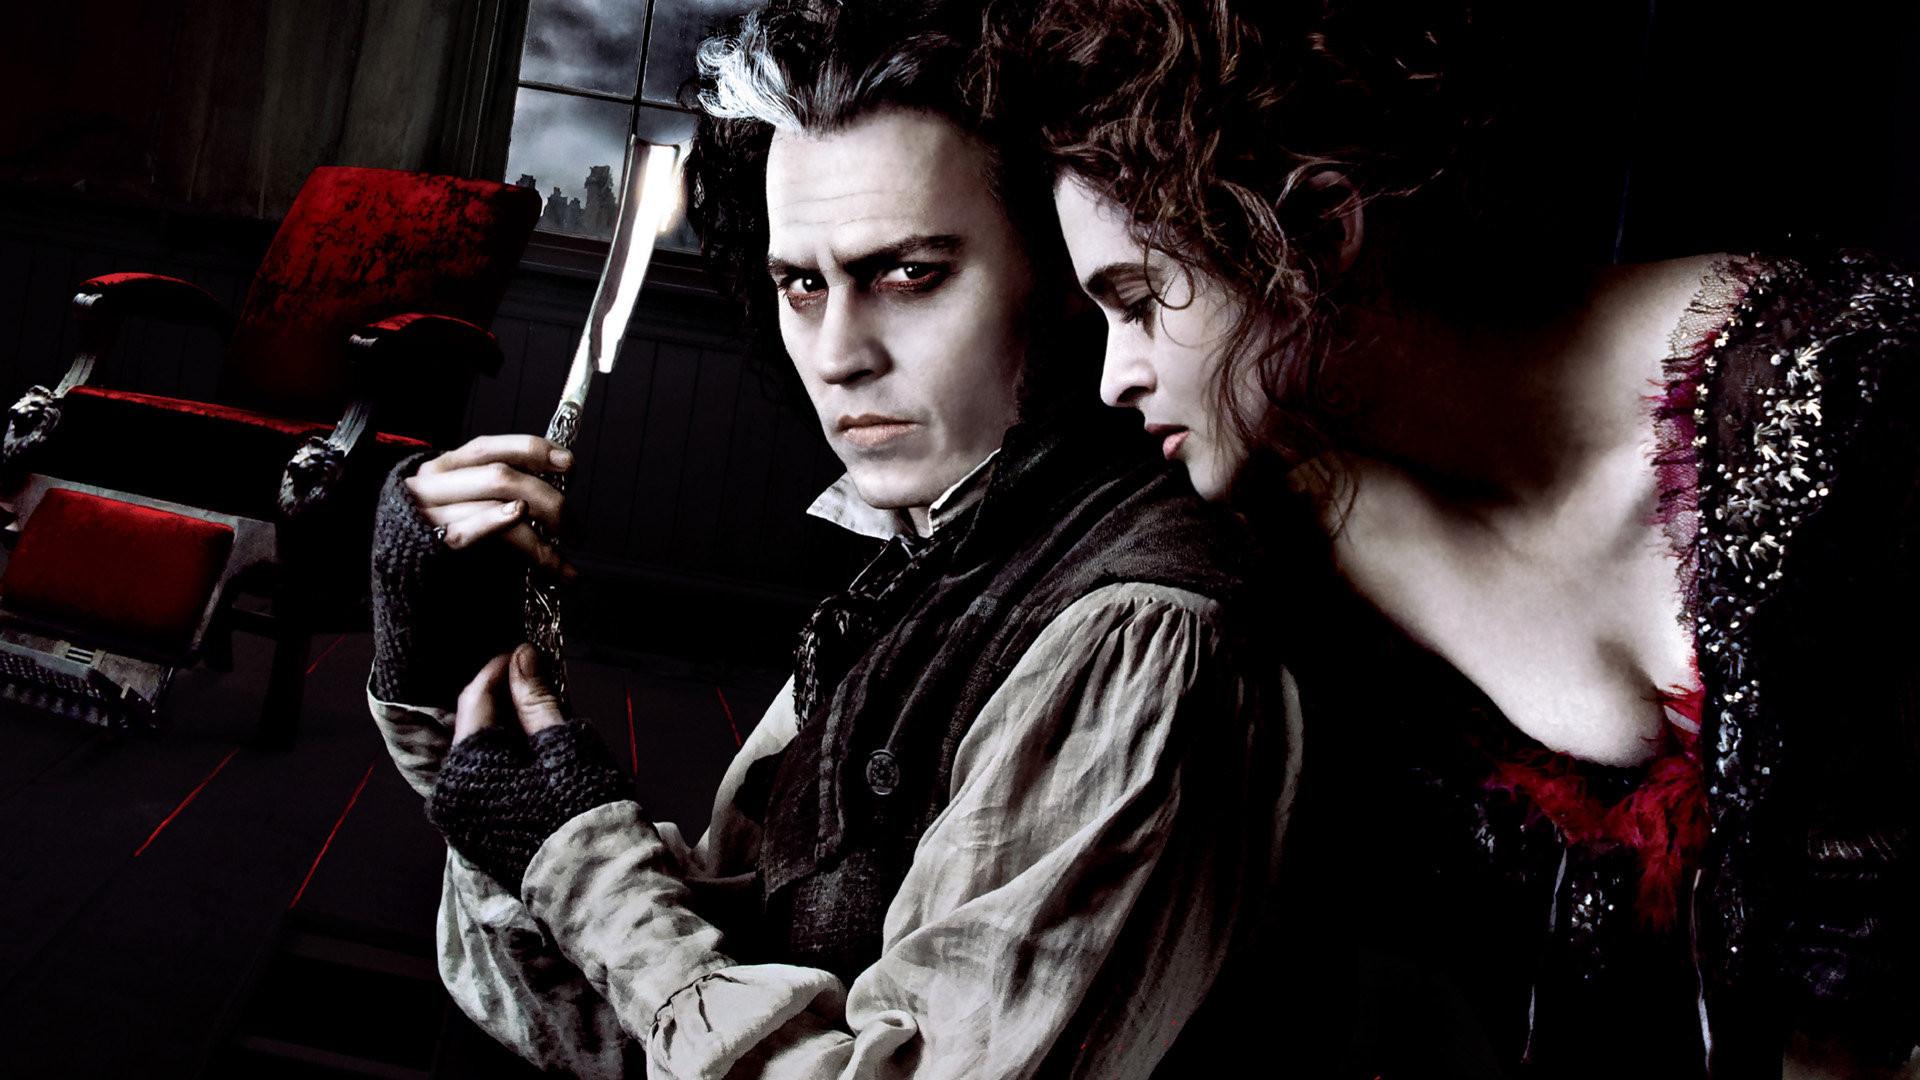 The limited edition Blu-ray Steelbook of SWEENEY TODD is being released!